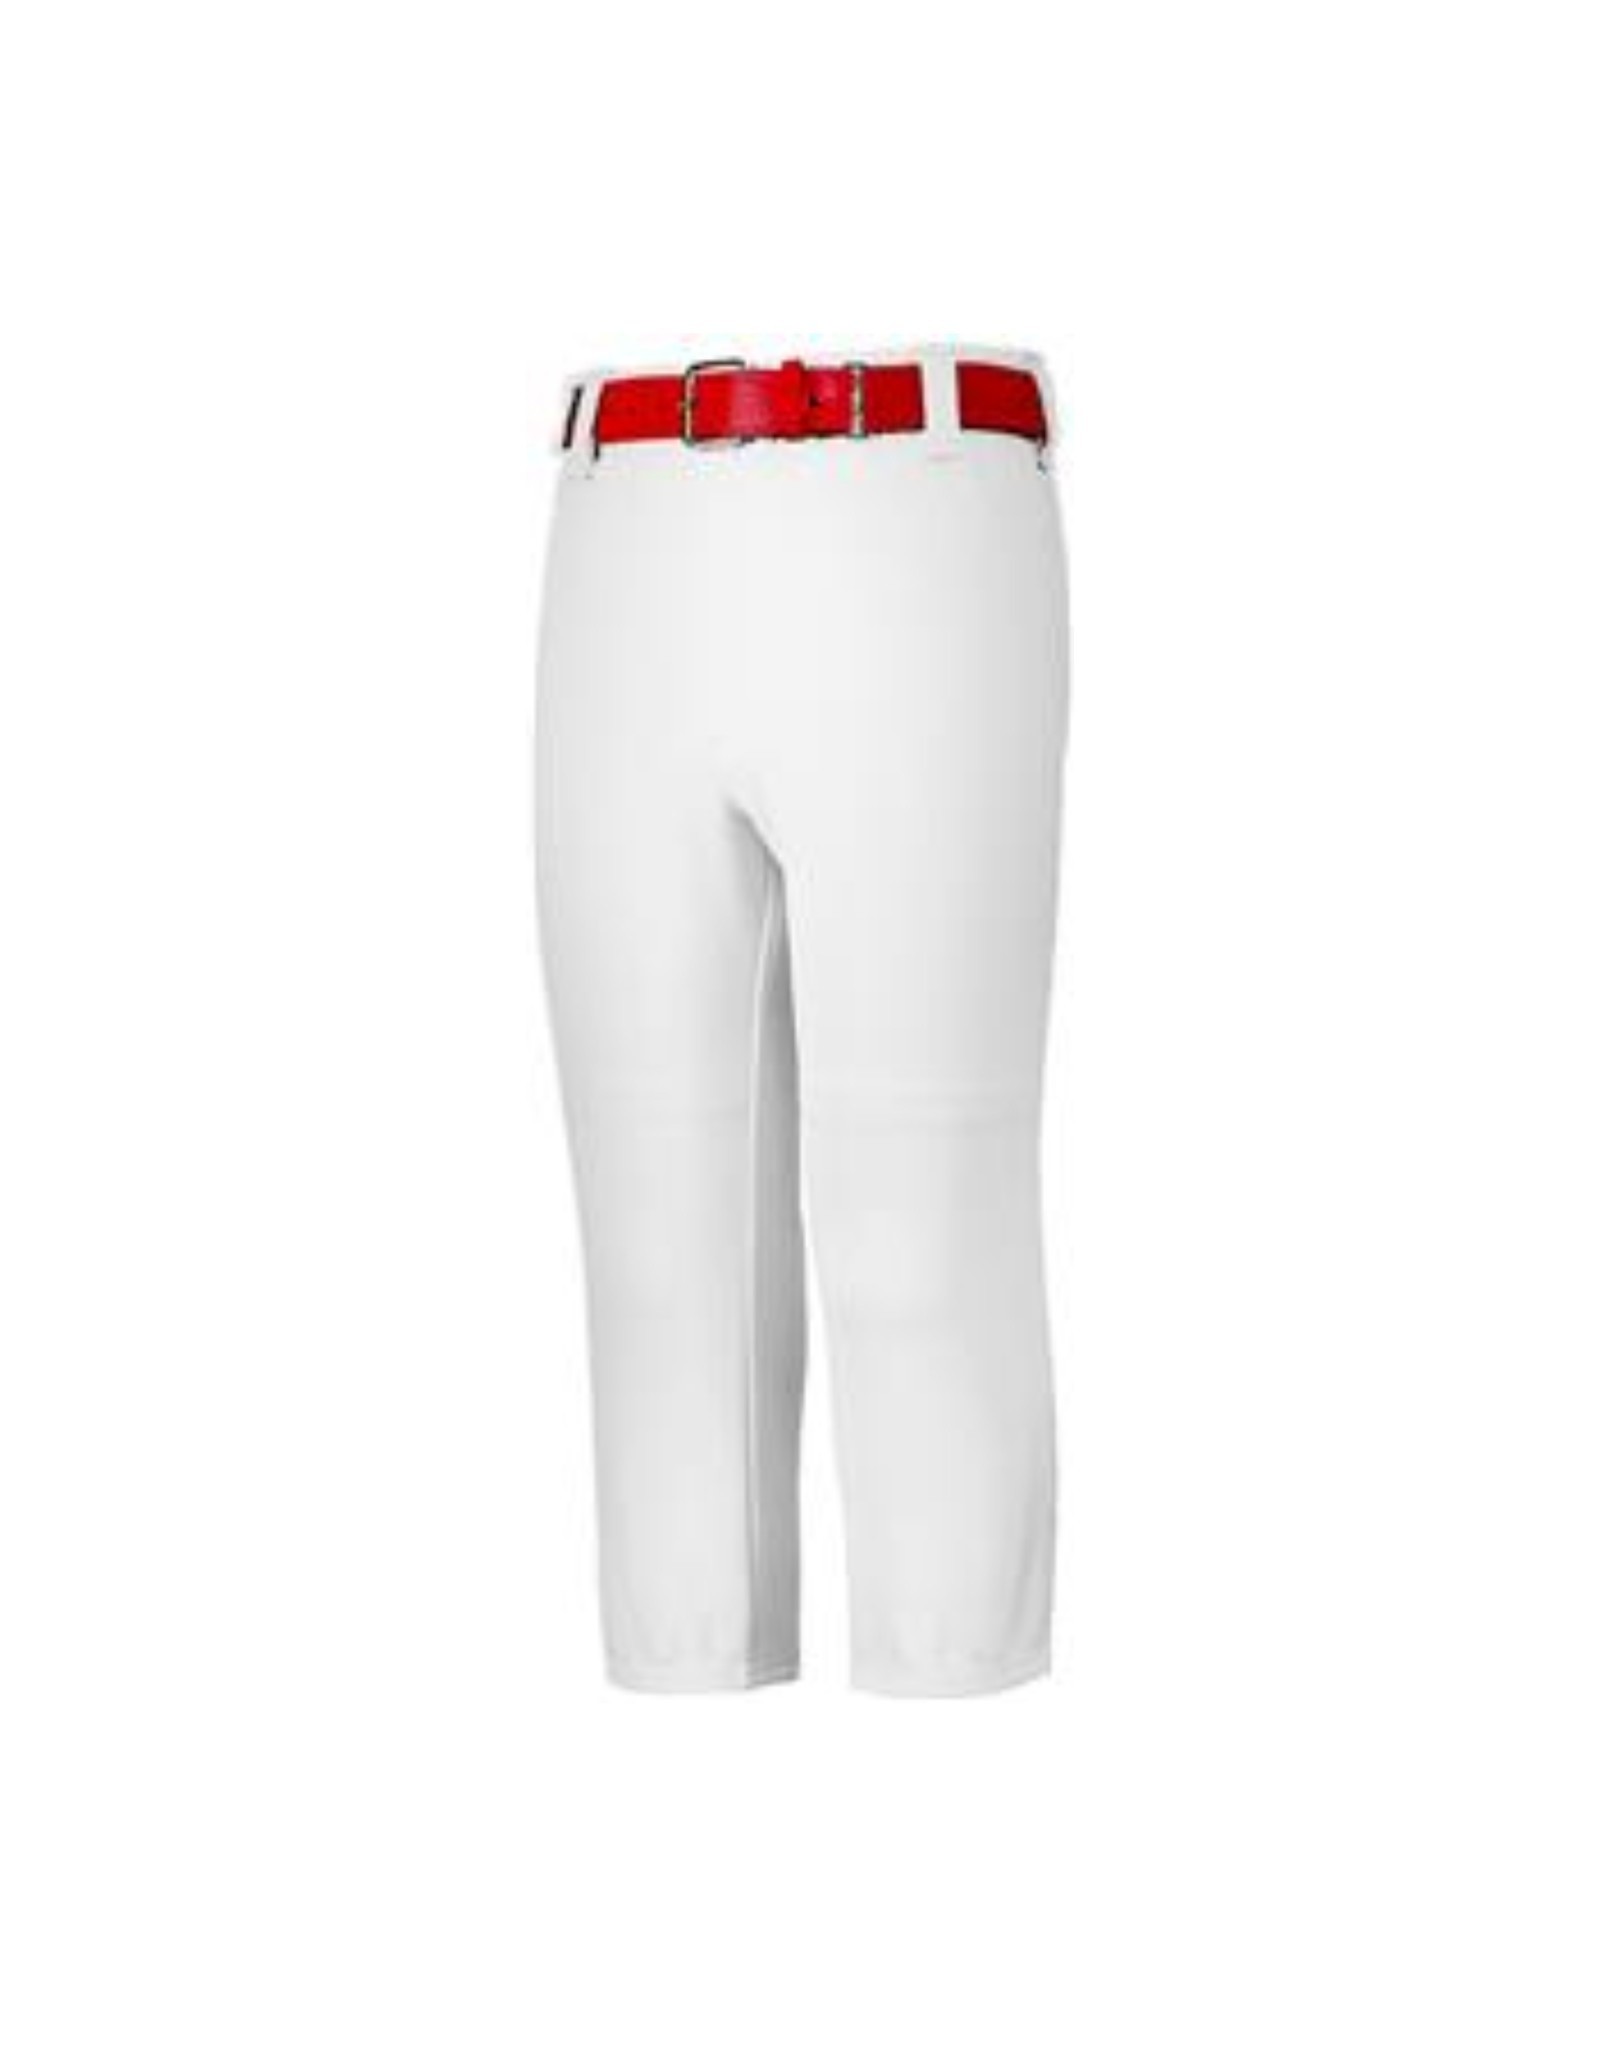 Augusta Adult Pull-Up Baseball Pants w/Loops (White)